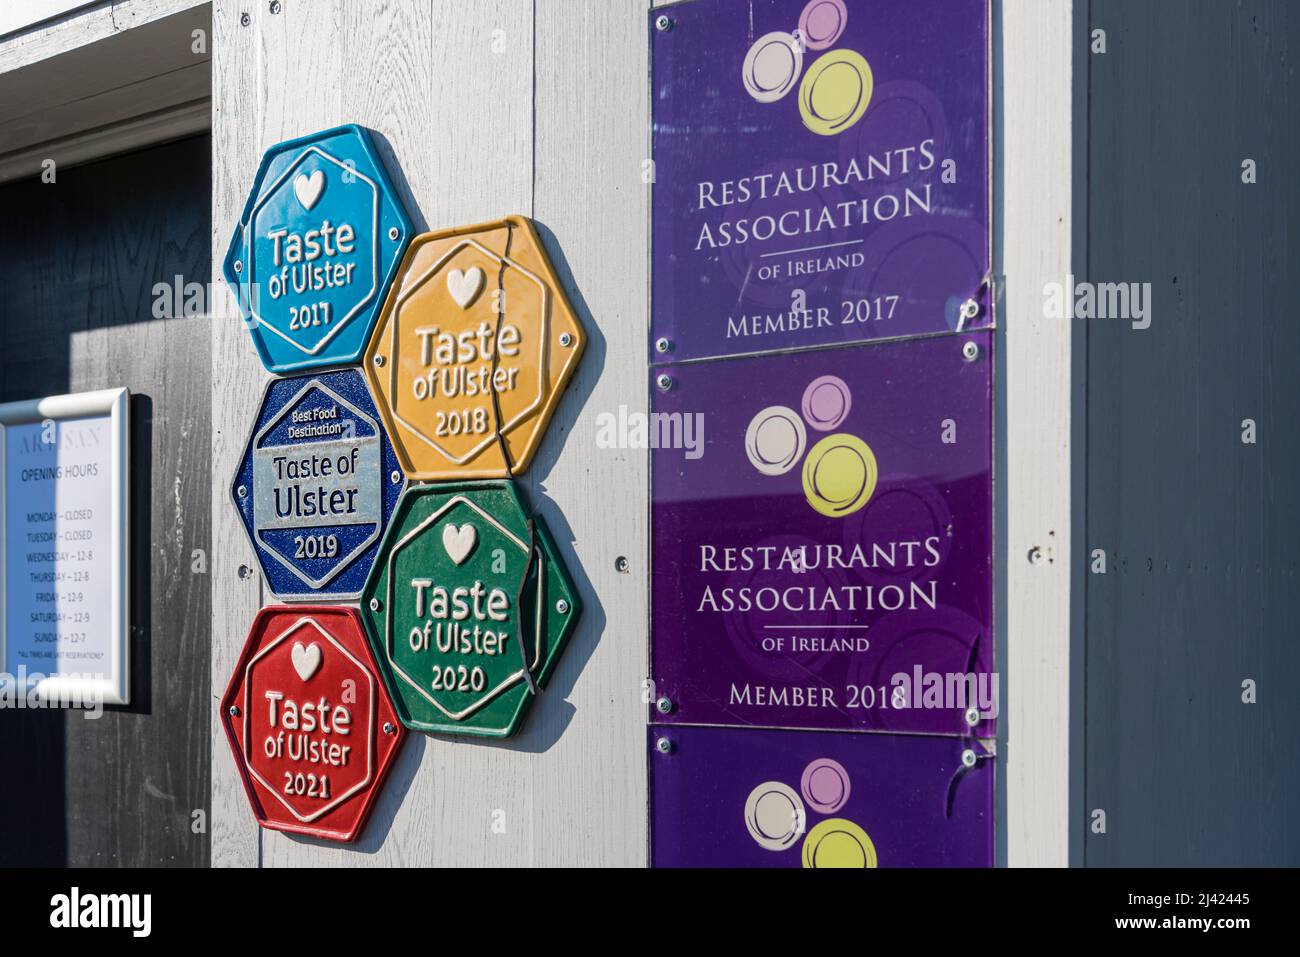 Taste of Ulster awards from 2017 to 2021, as well as plaques showing membership of the Restaurants Association of Ireland on the outside of a restaura Stock Photo